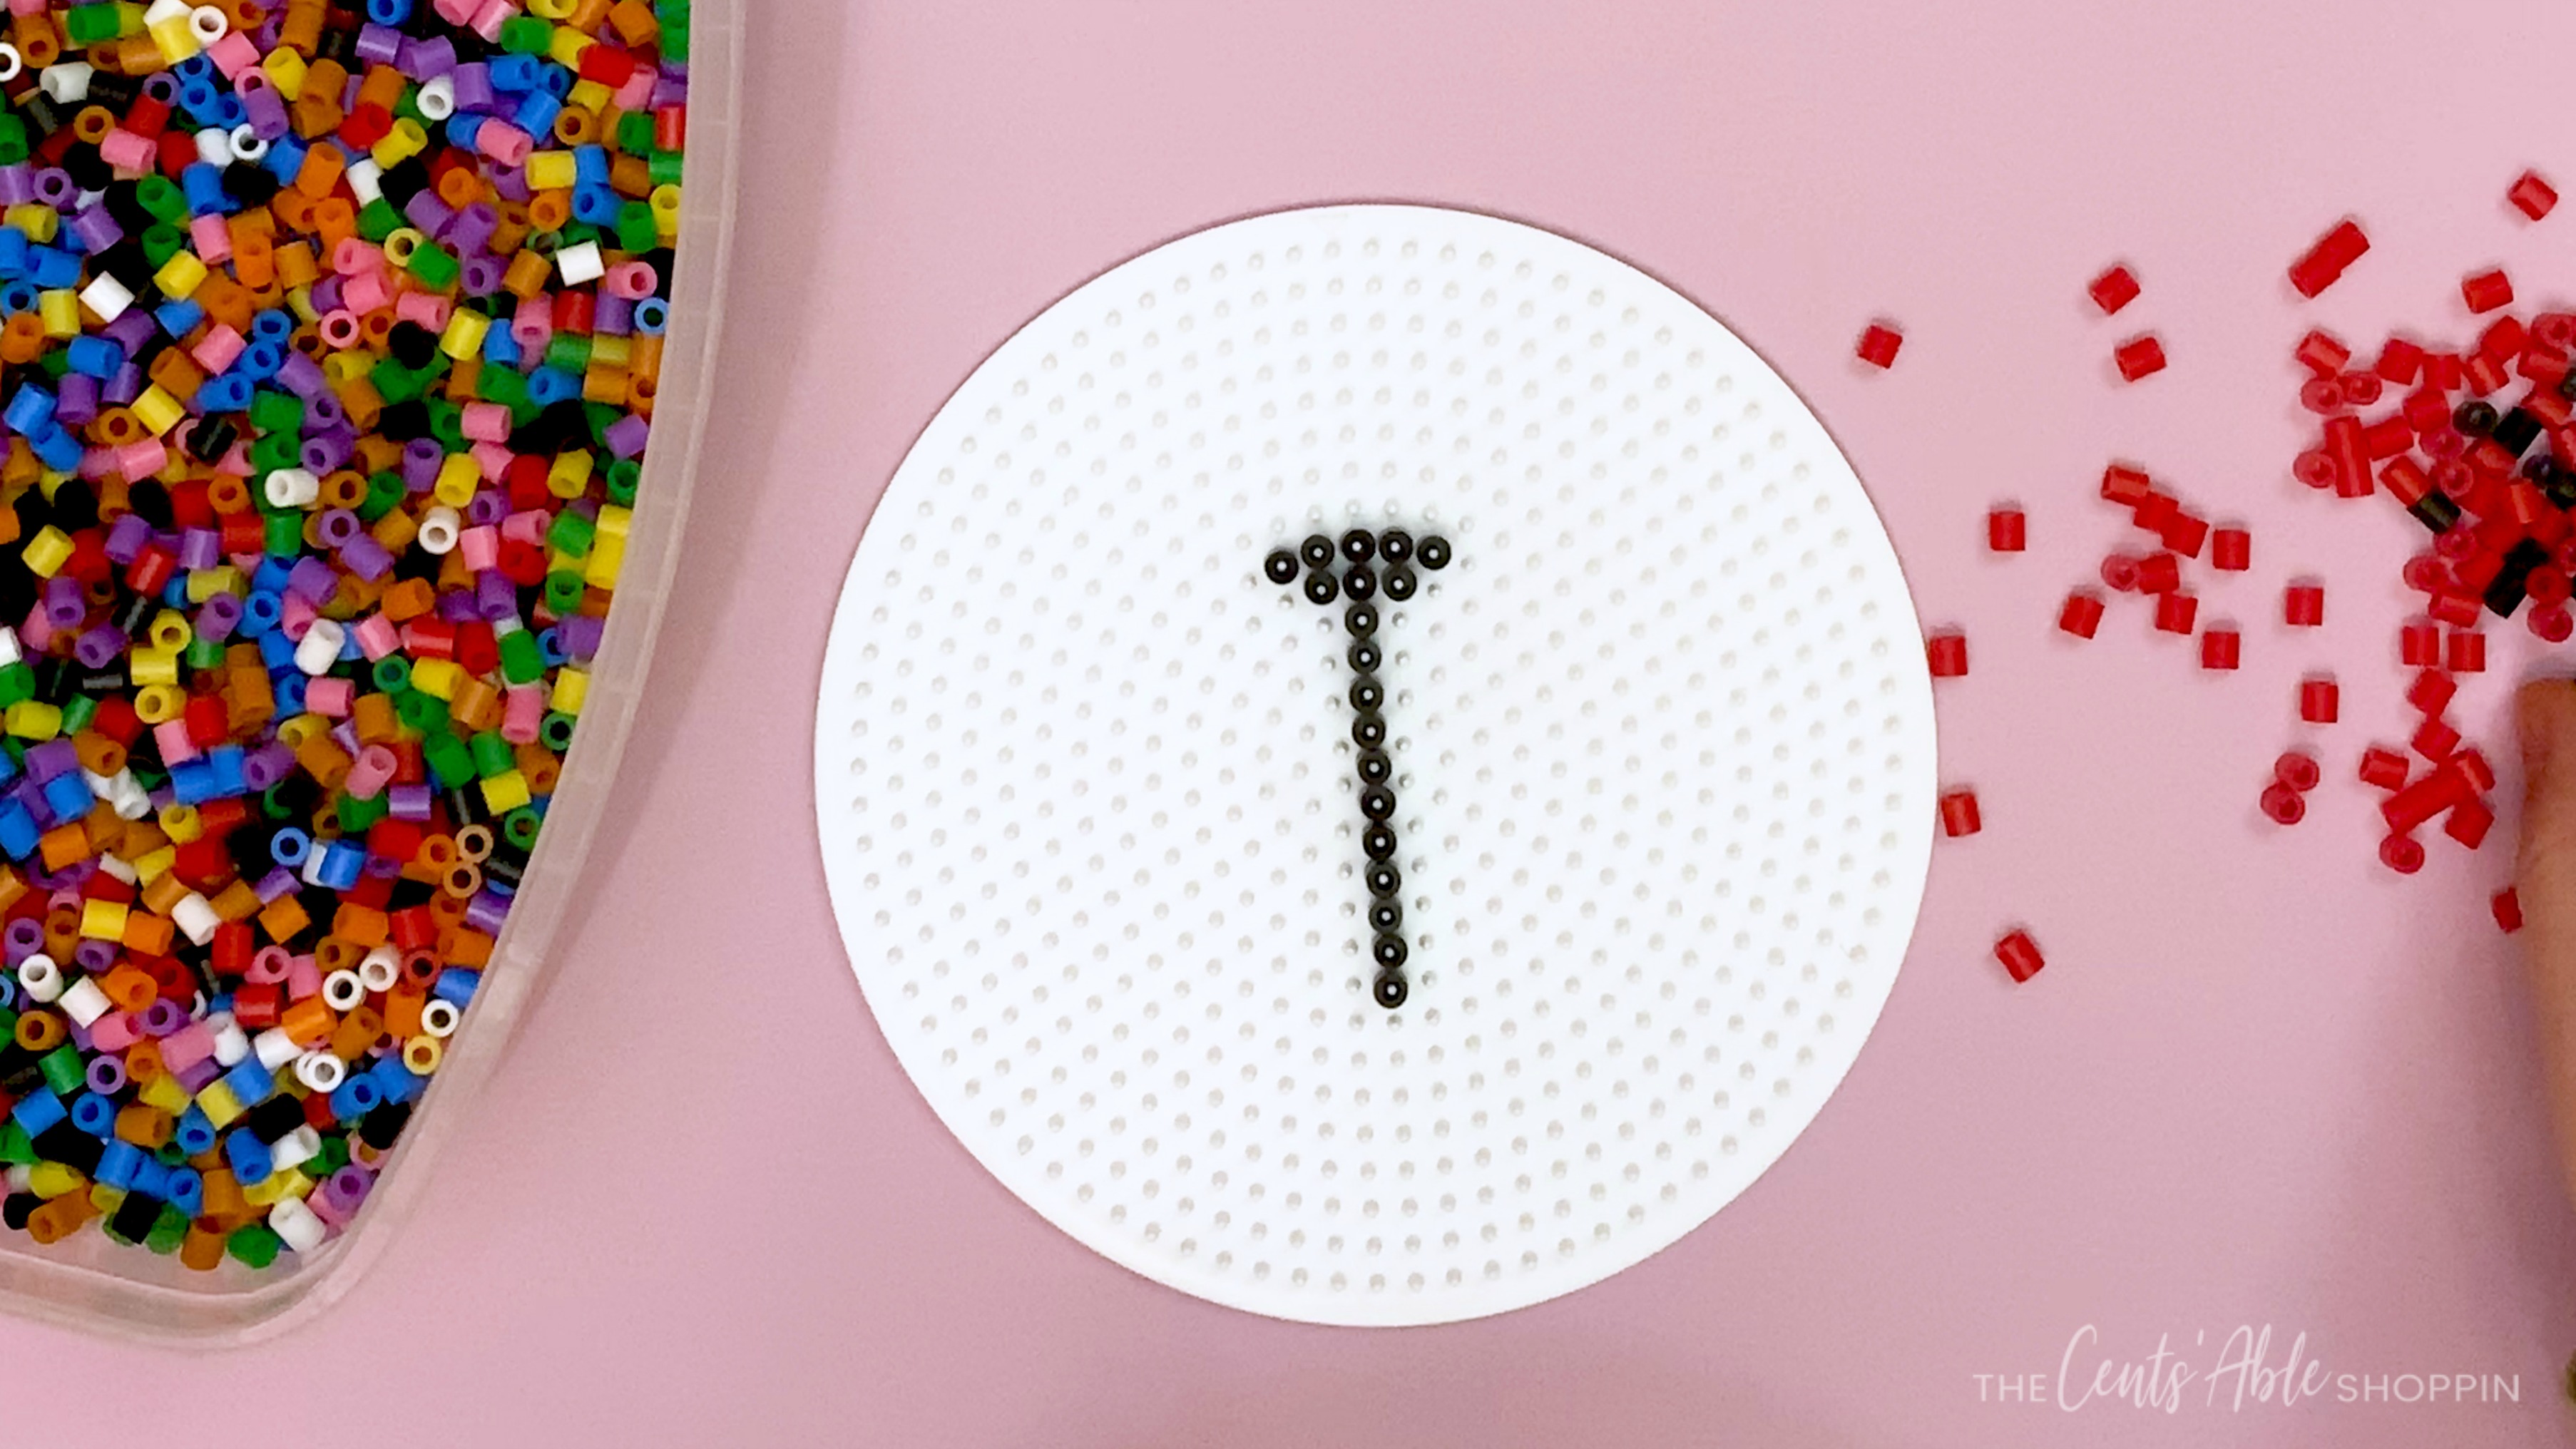 This perler bead ladybug is a fun and adorable project that will help kids develop fine motor skills, patience and artistic design!